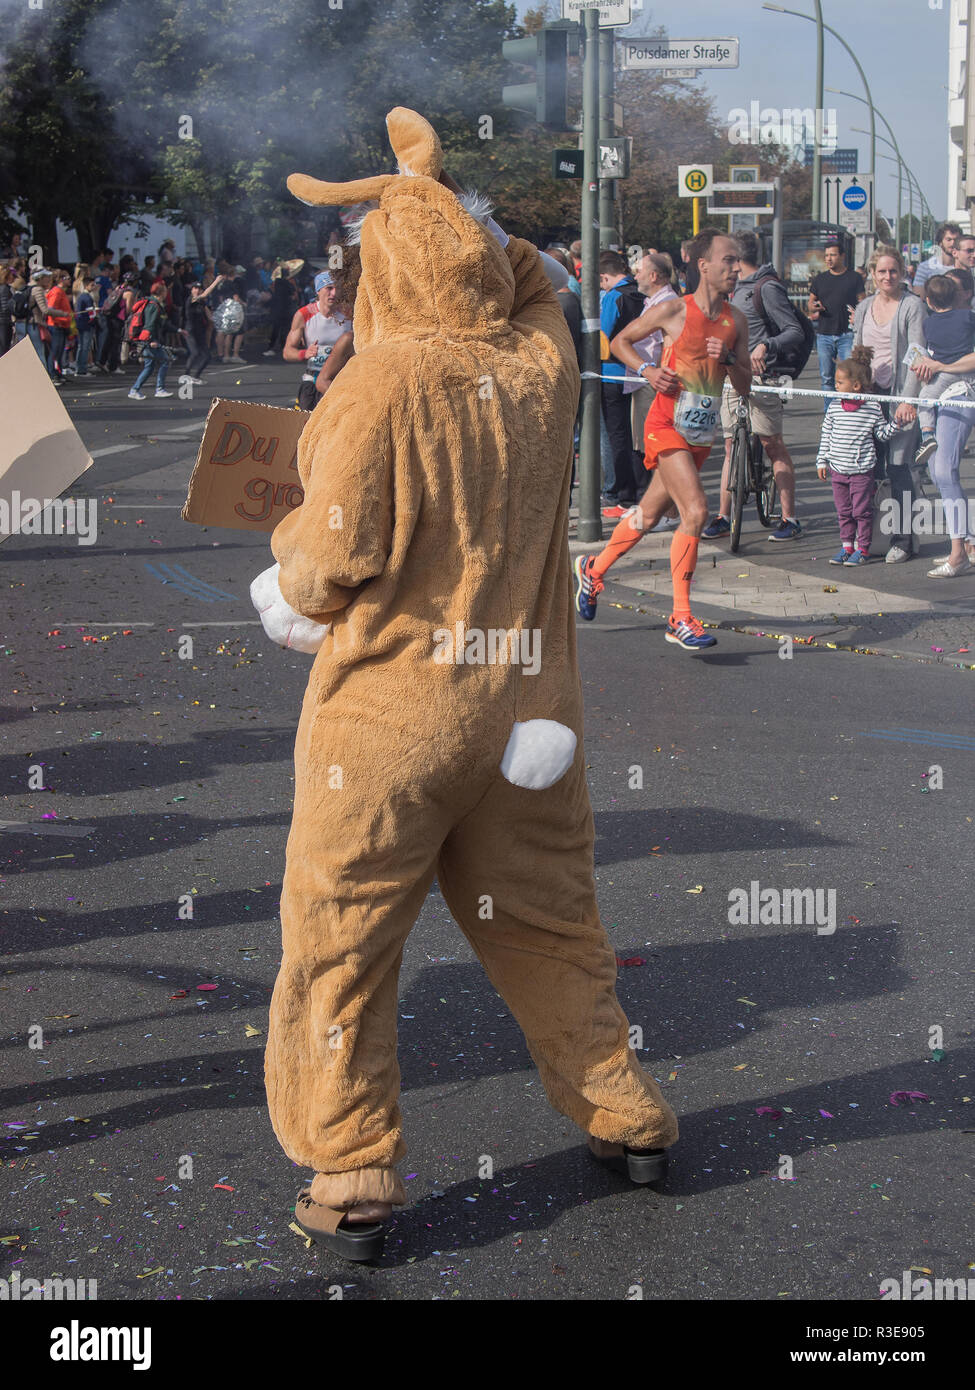 BERLIN, GERMANY - SEPTEMBER 25, 2016: Spectator With A Rabbit Costume And Runners At Berlin Marathon 2016 Stock Photo